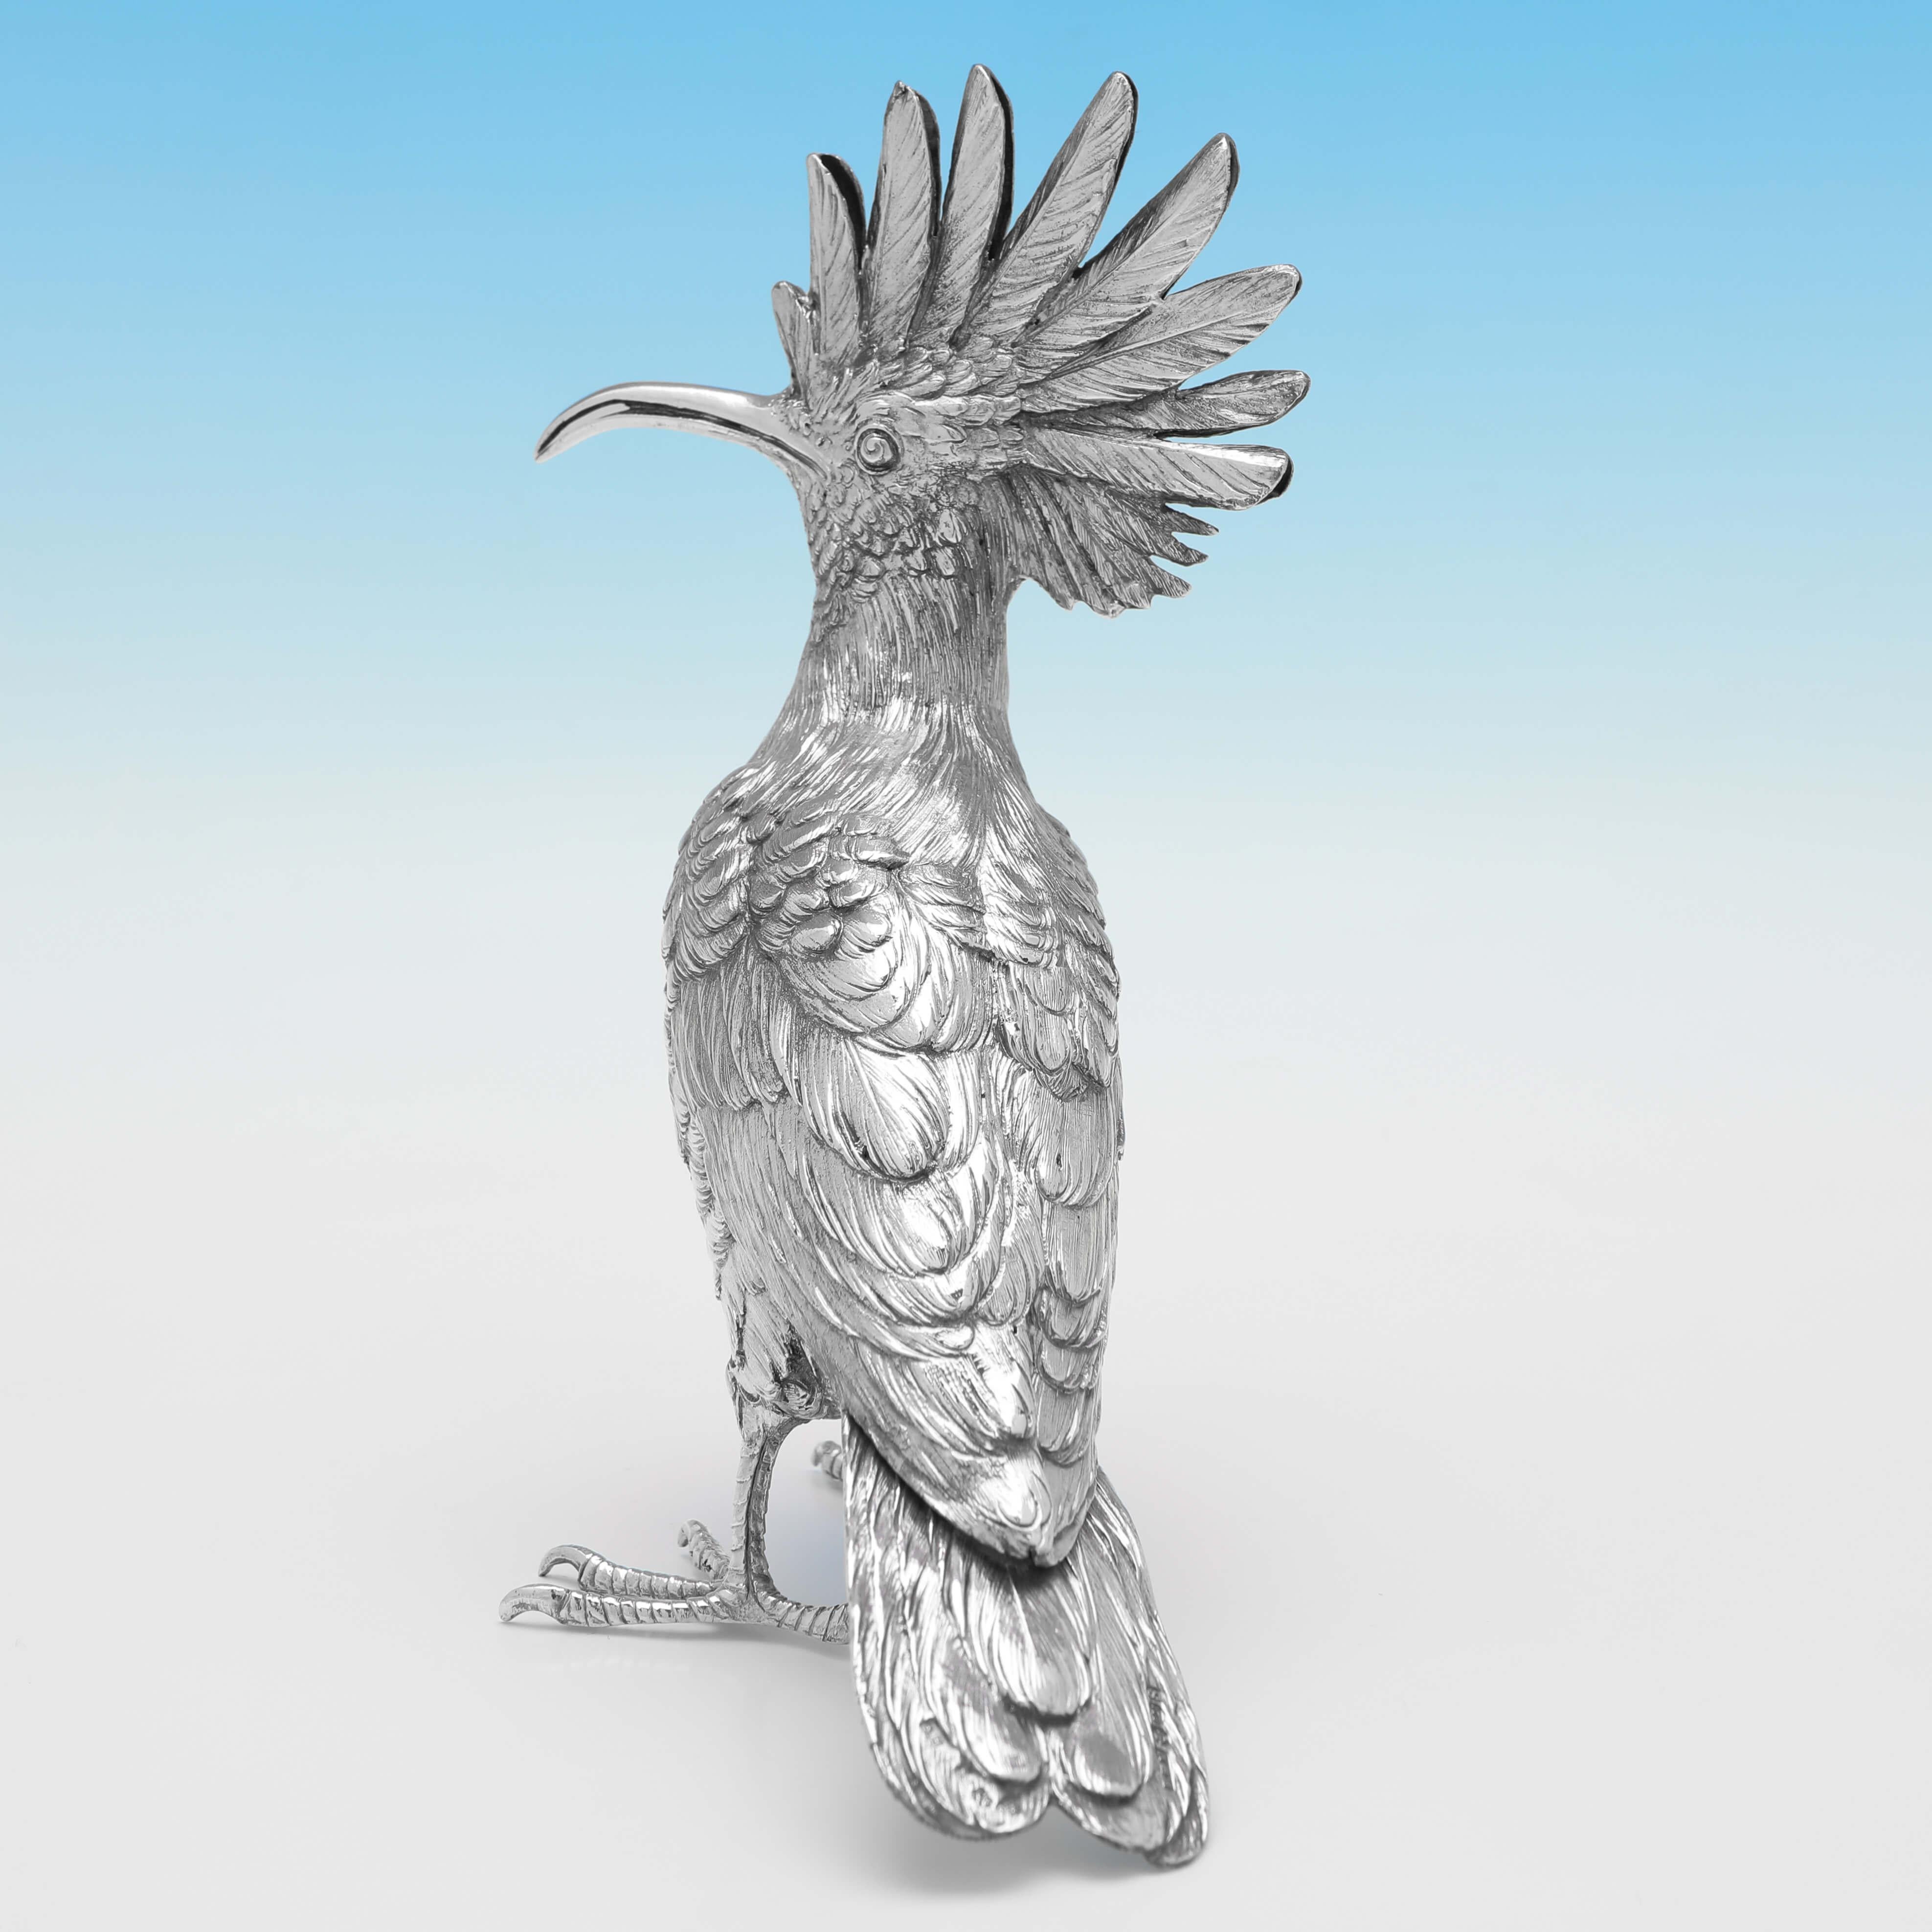 English Rare Sterling Silver Hoopoe Model - Import Mark London 1913 by Berthold Muller For Sale